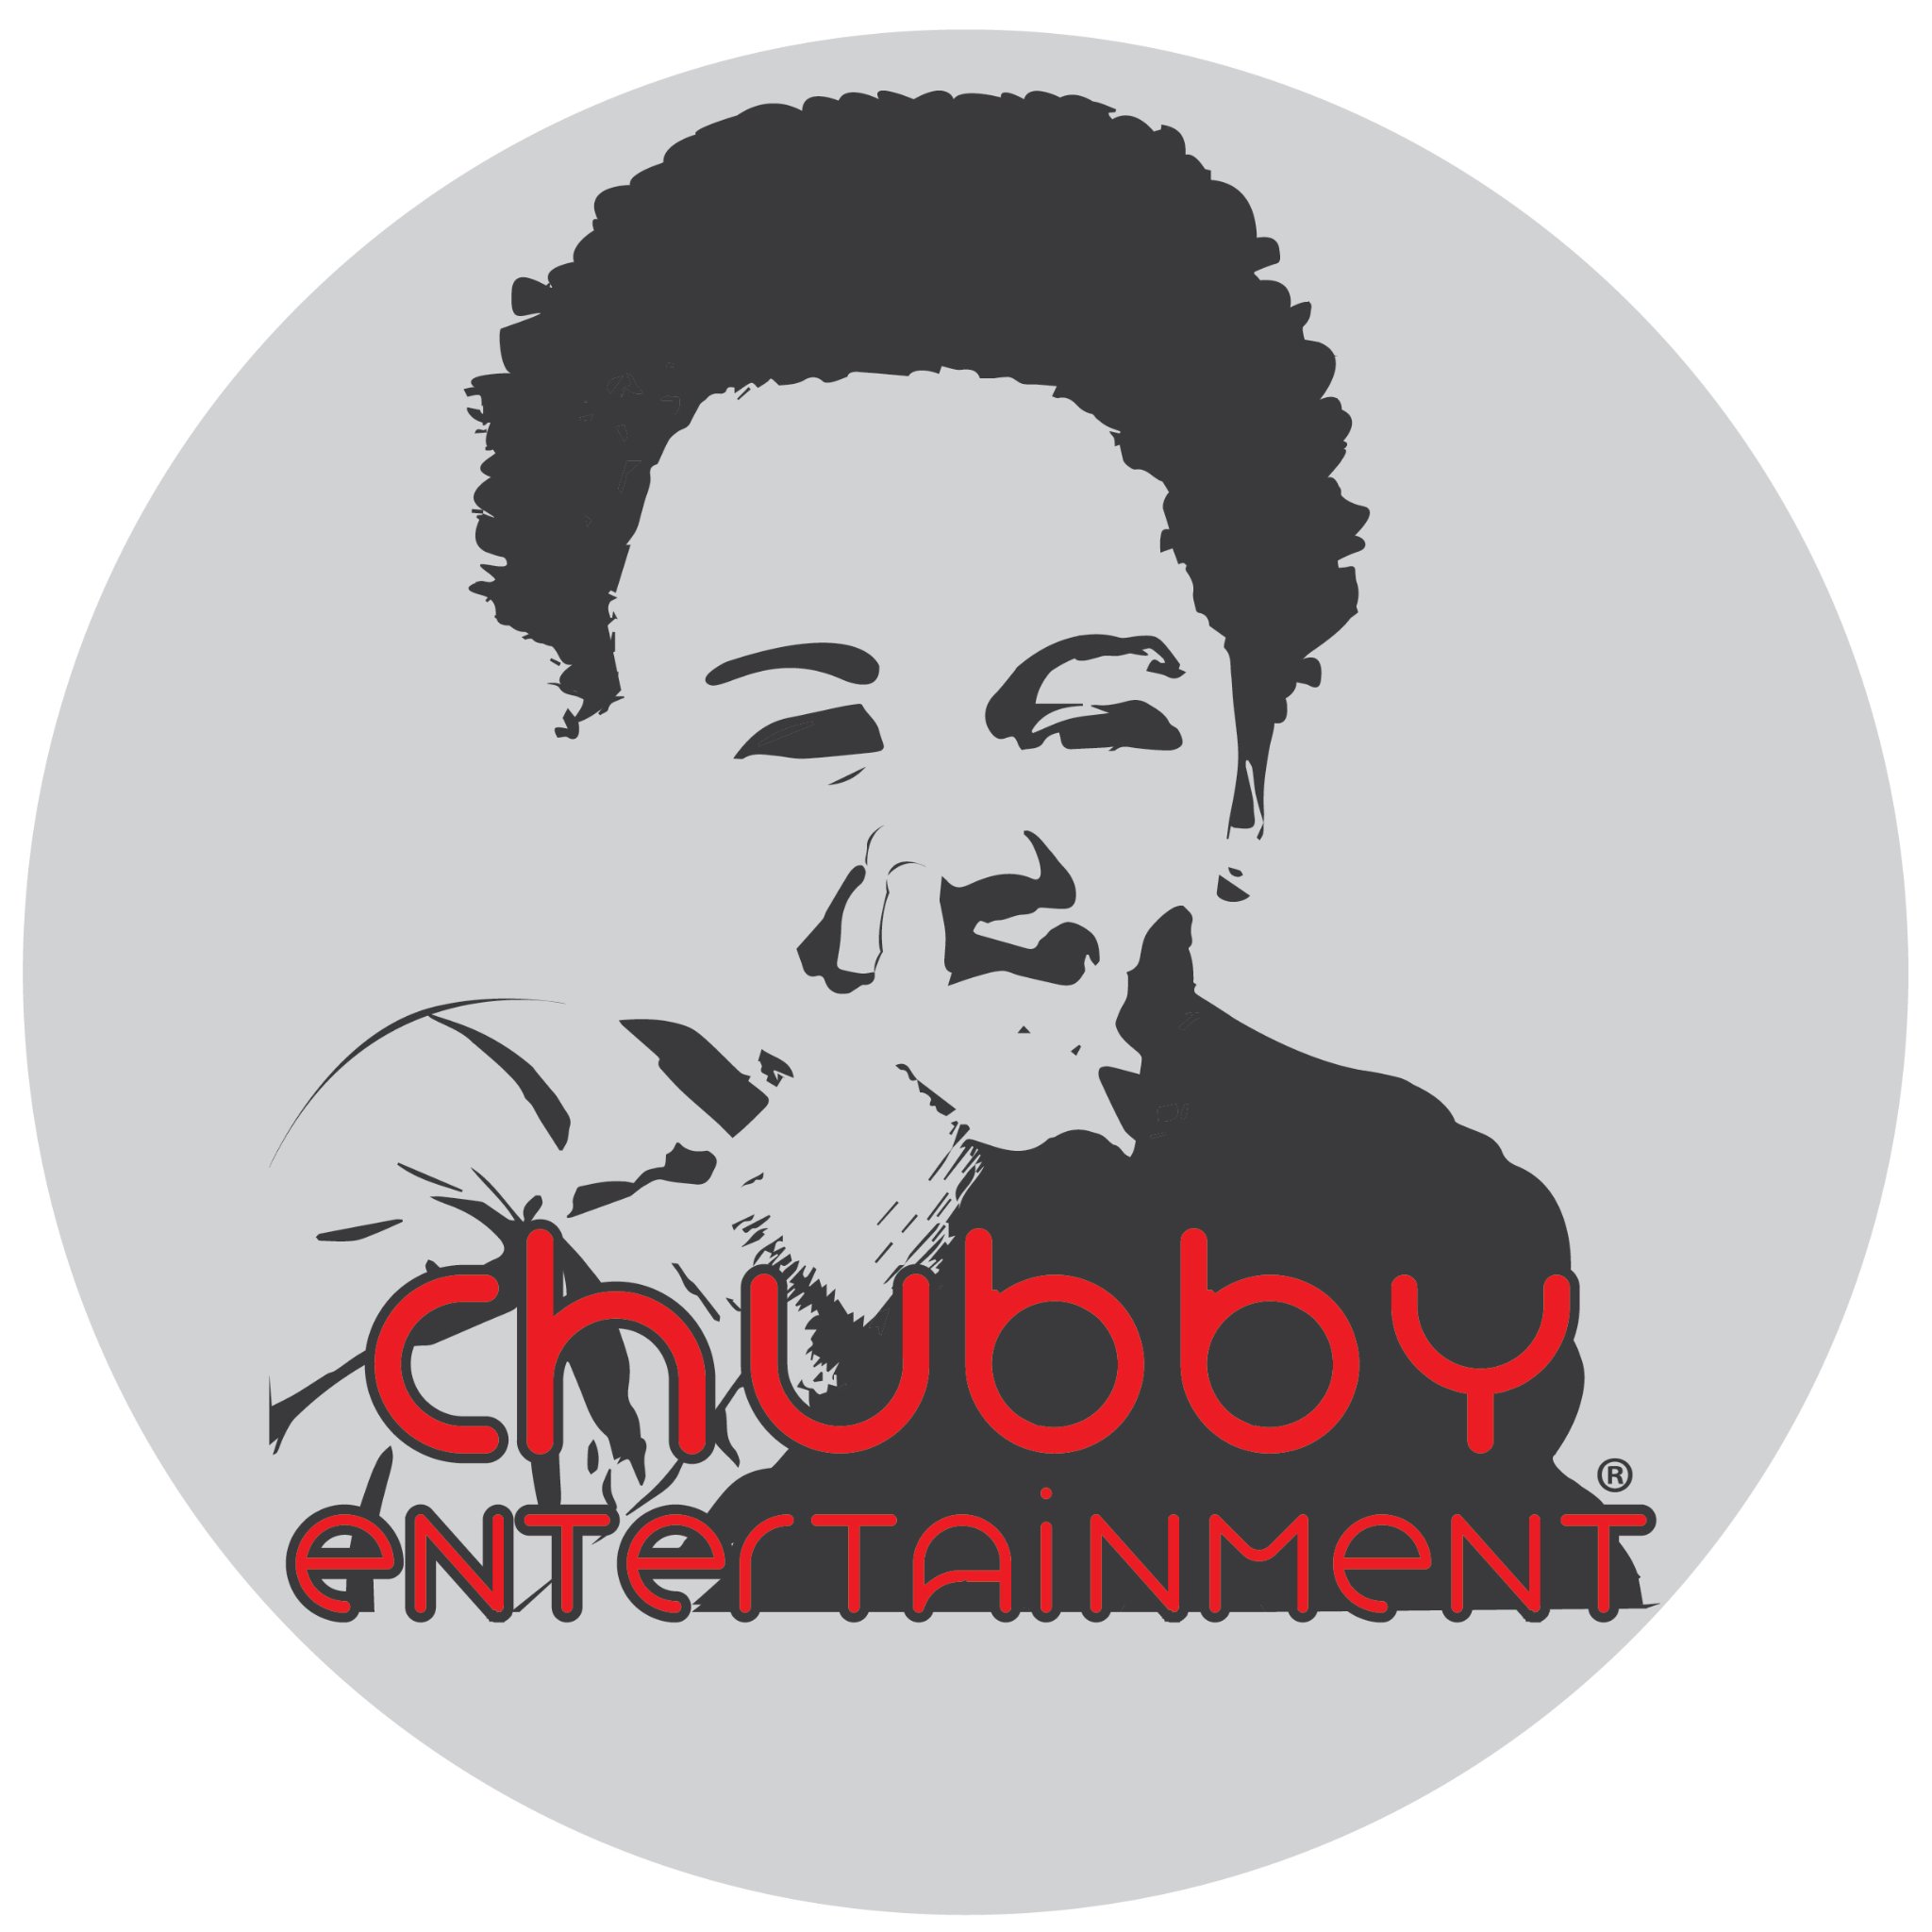 ChubbTheComedian presents... Chubby Kidz Entertainment ~ 
Kids Characters 4 All Parties & Events + 🎉
~ Chubb The Comedian ~ #SideKidzLivesMatter